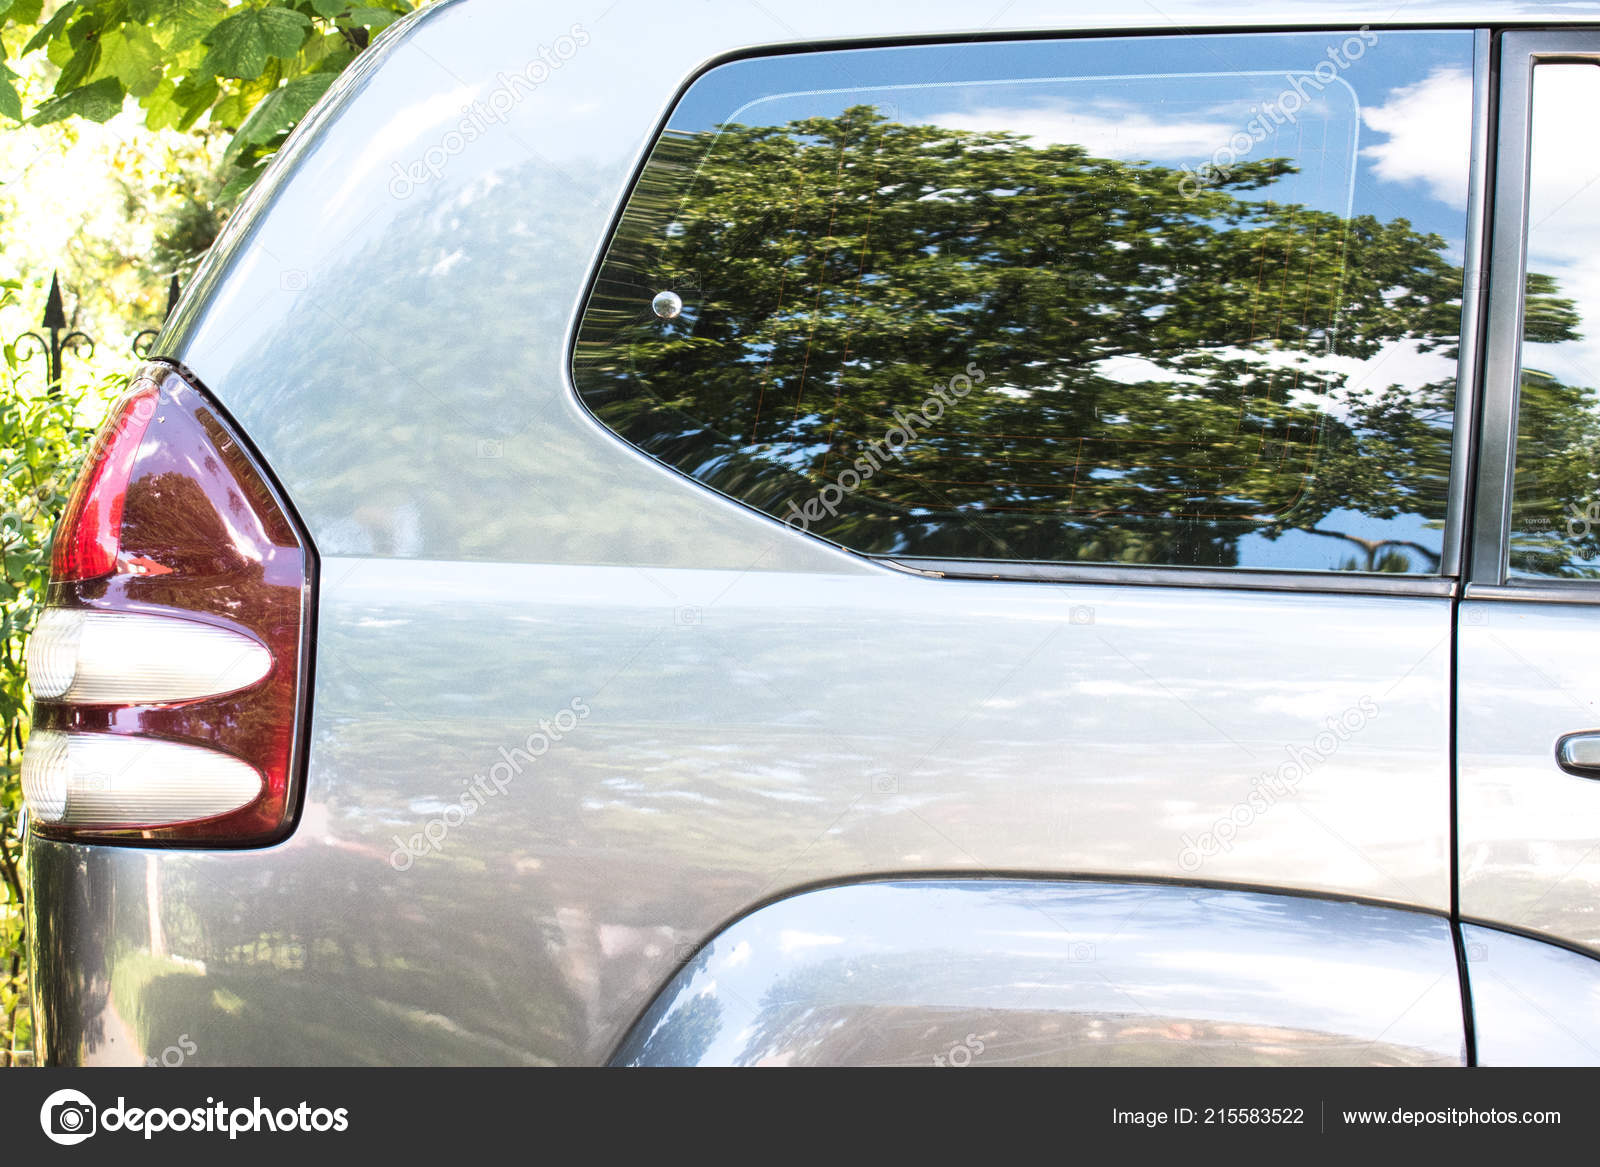 Download Bumper Sticker Mockup Side View Of A Car Parked On The Street In Summer Sunny Day Mock Up For Sticker Or Decals Stock Photo C Maddyz 215583522 Yellowimages Mockups